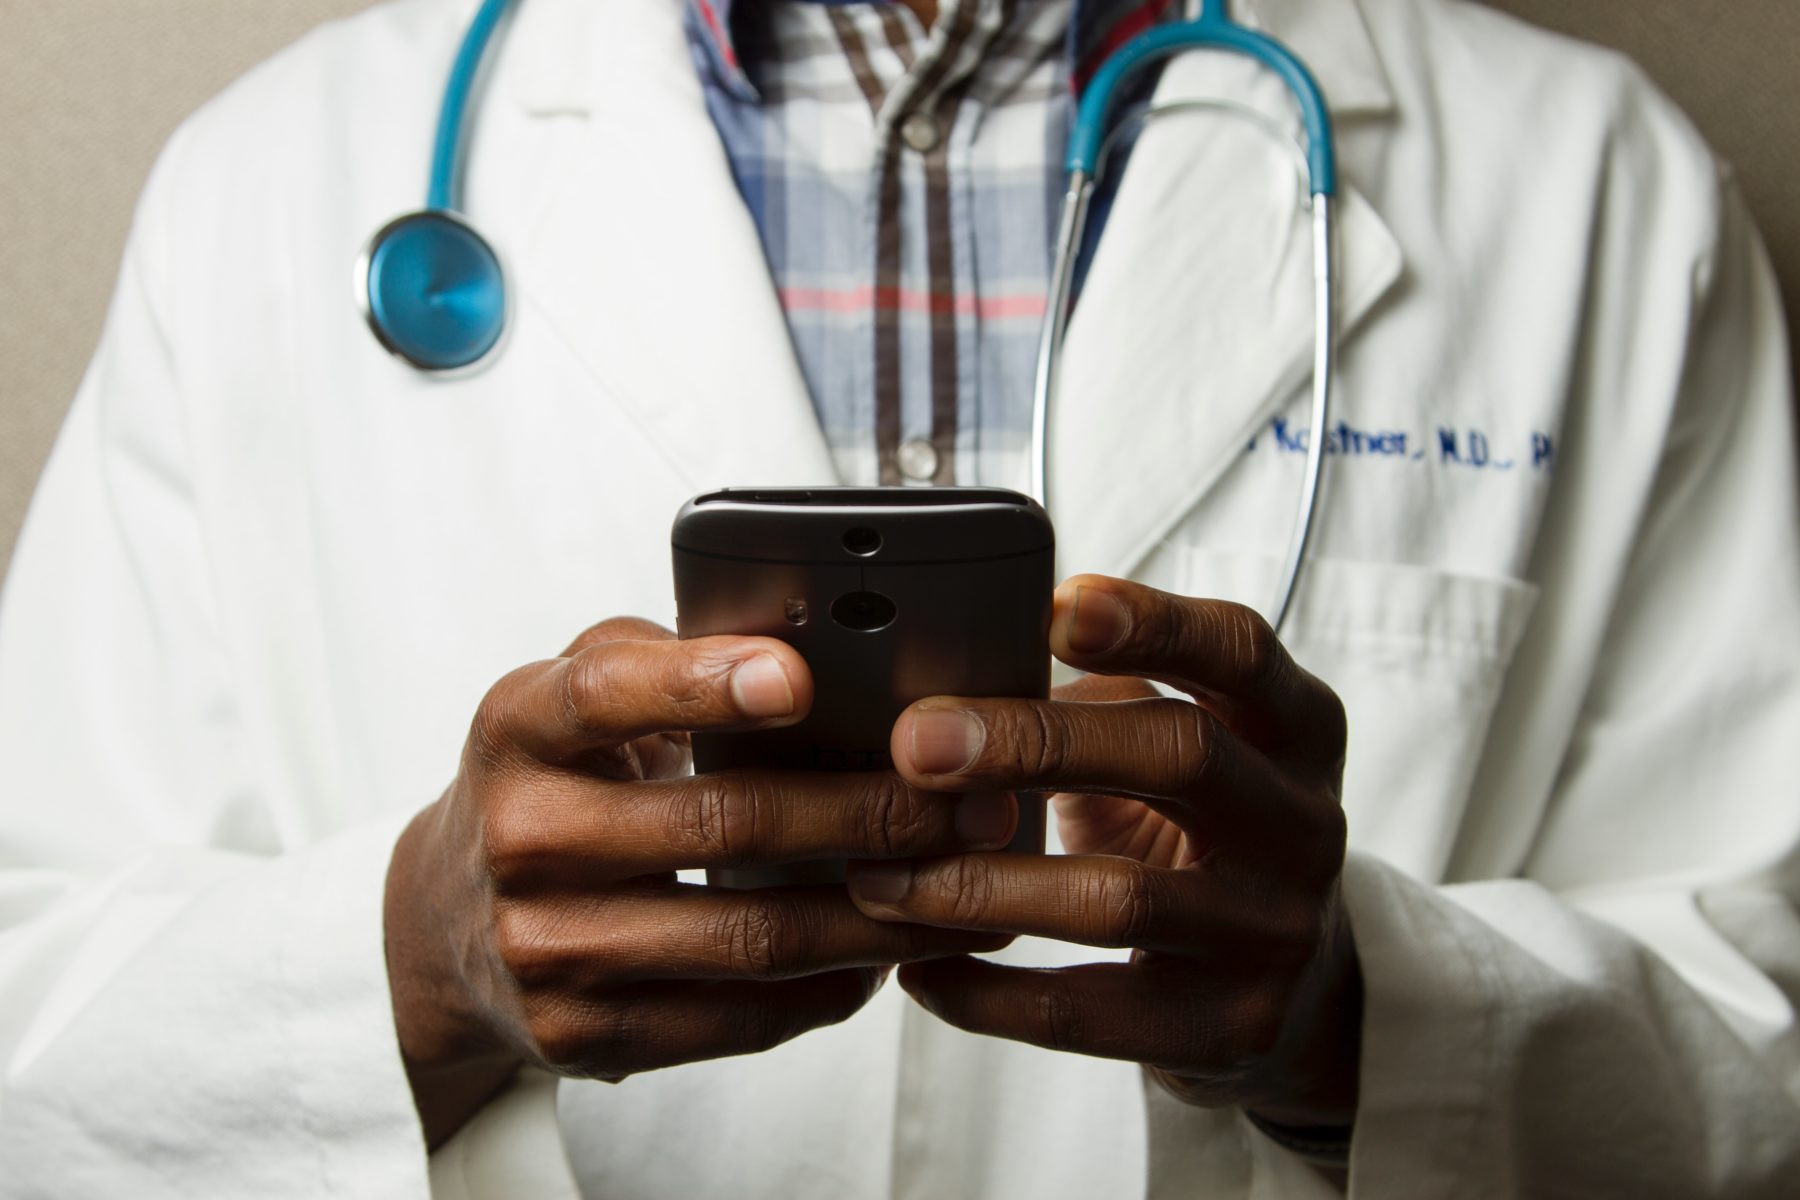 A doctor holding a mobile phone.